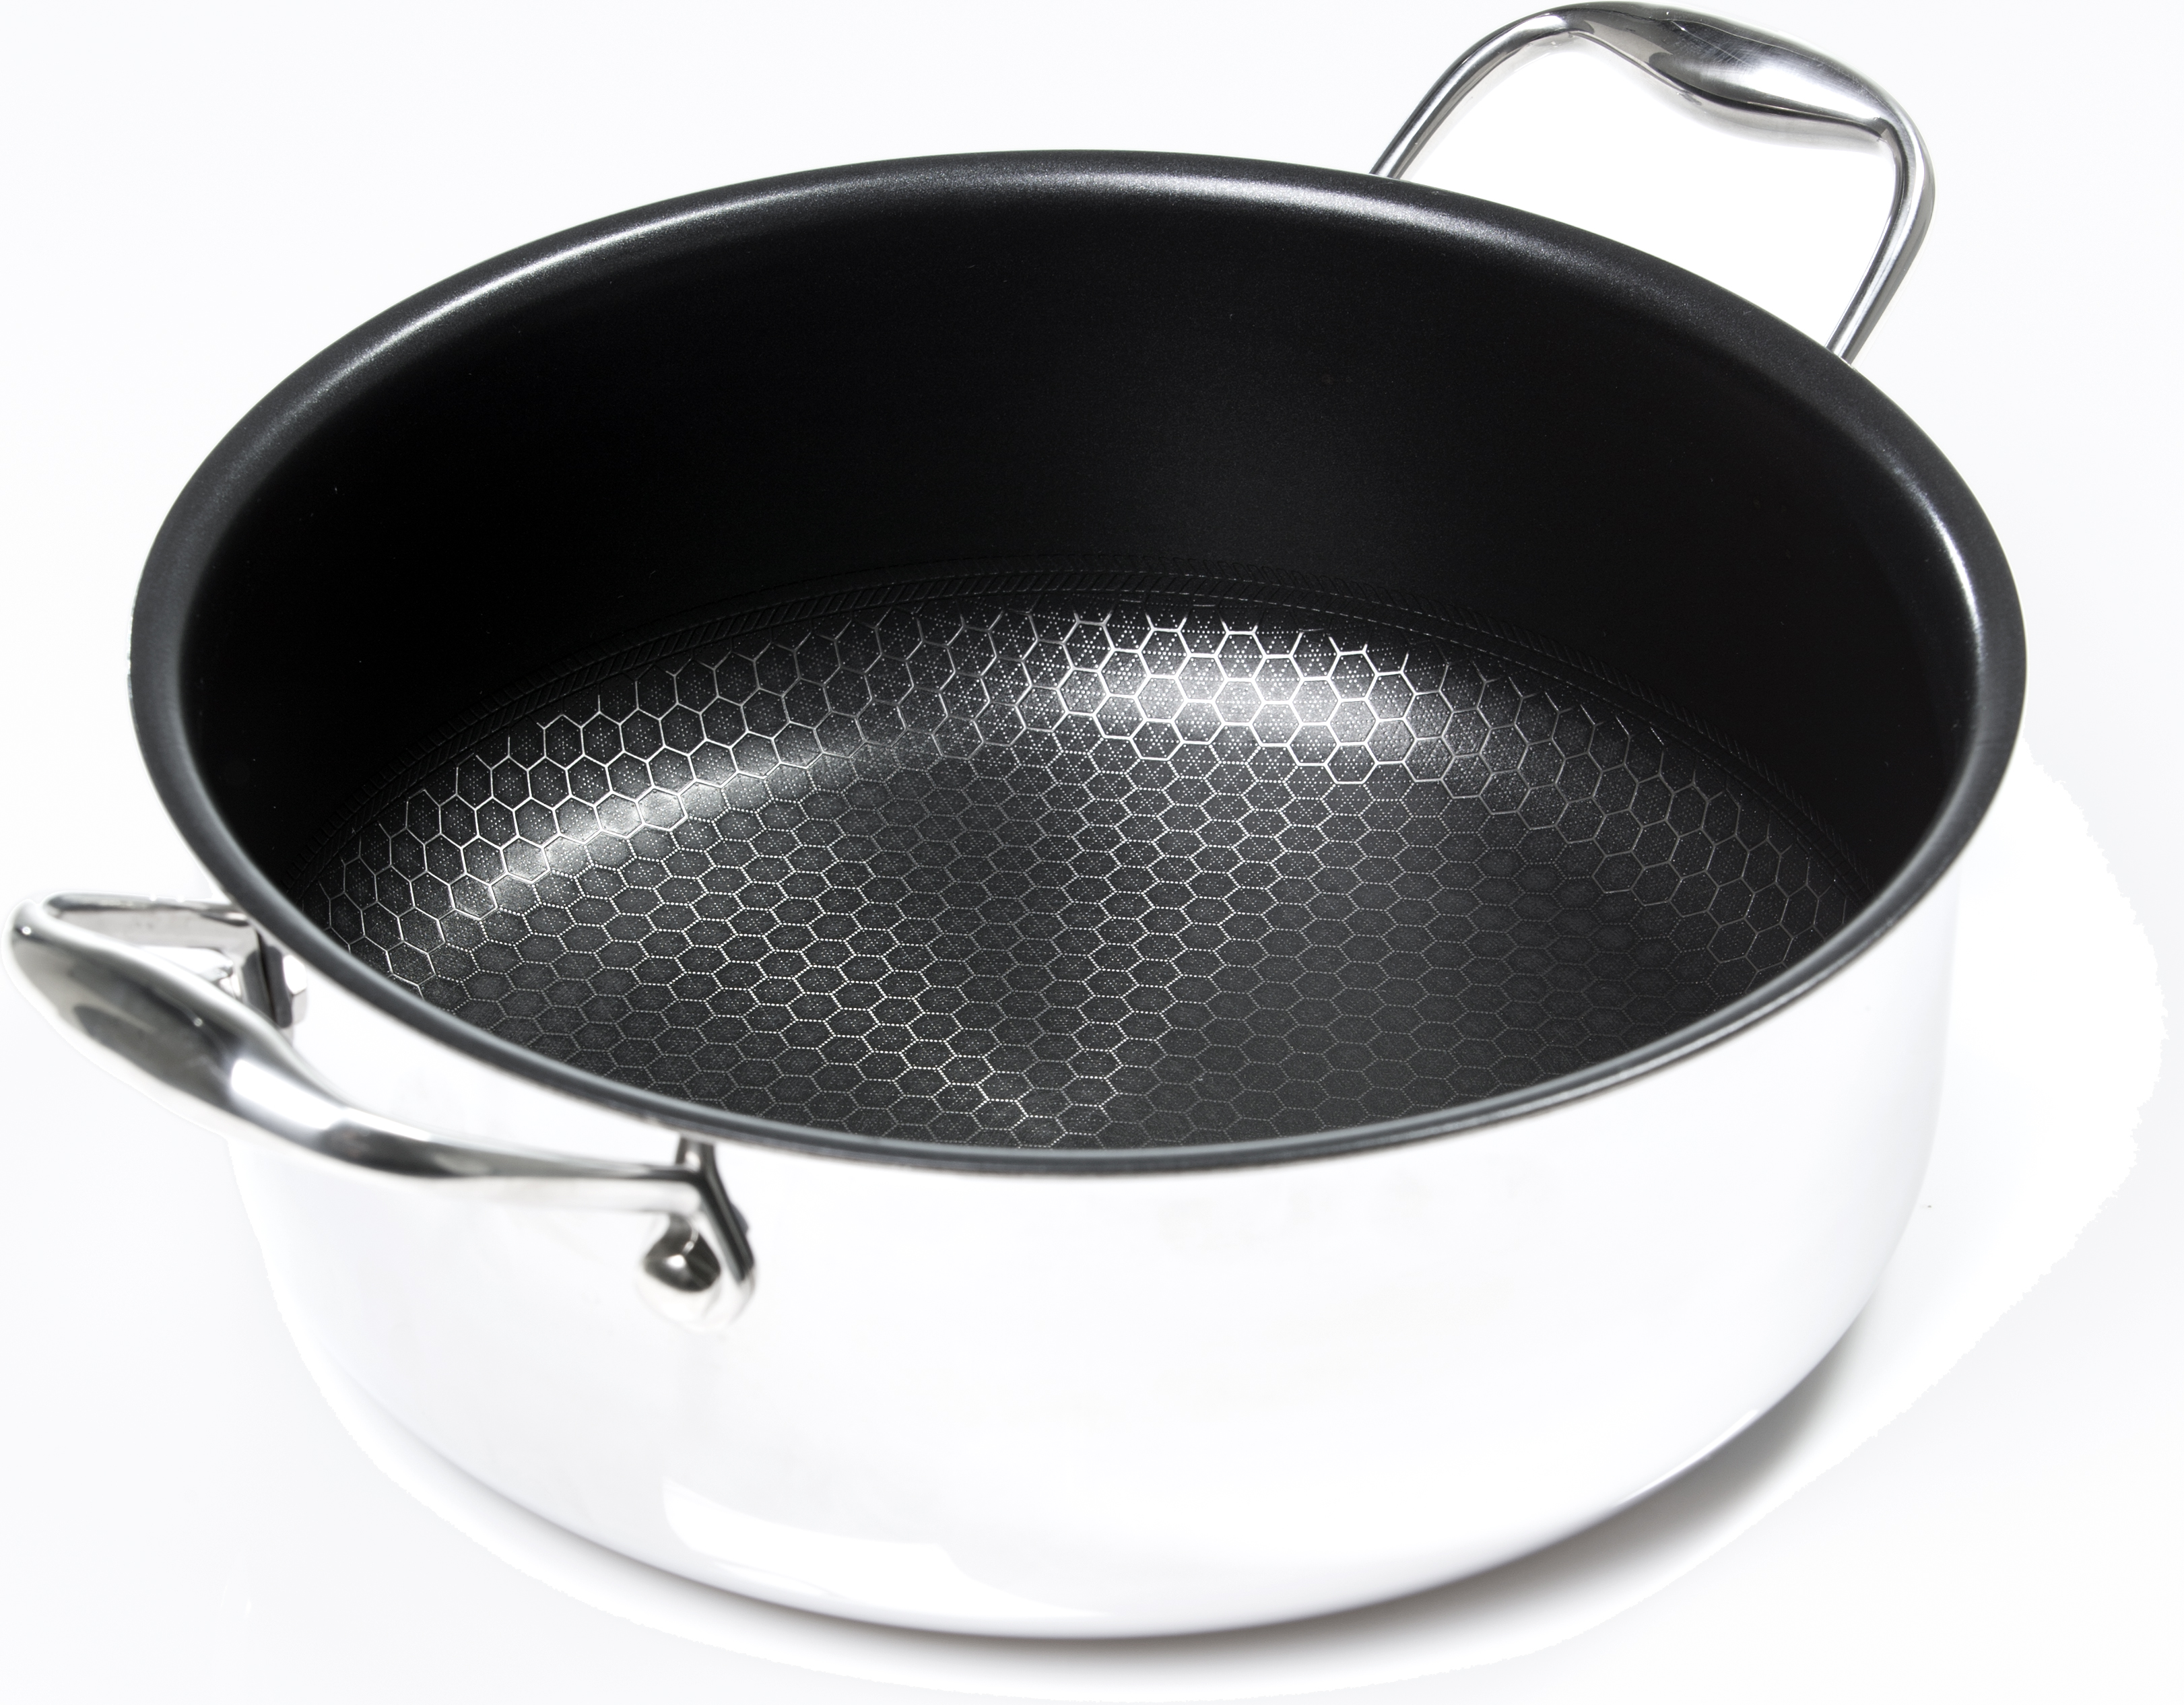 Frieling Adds New BLACK CUBE Cookware Styles - Kitchenware News